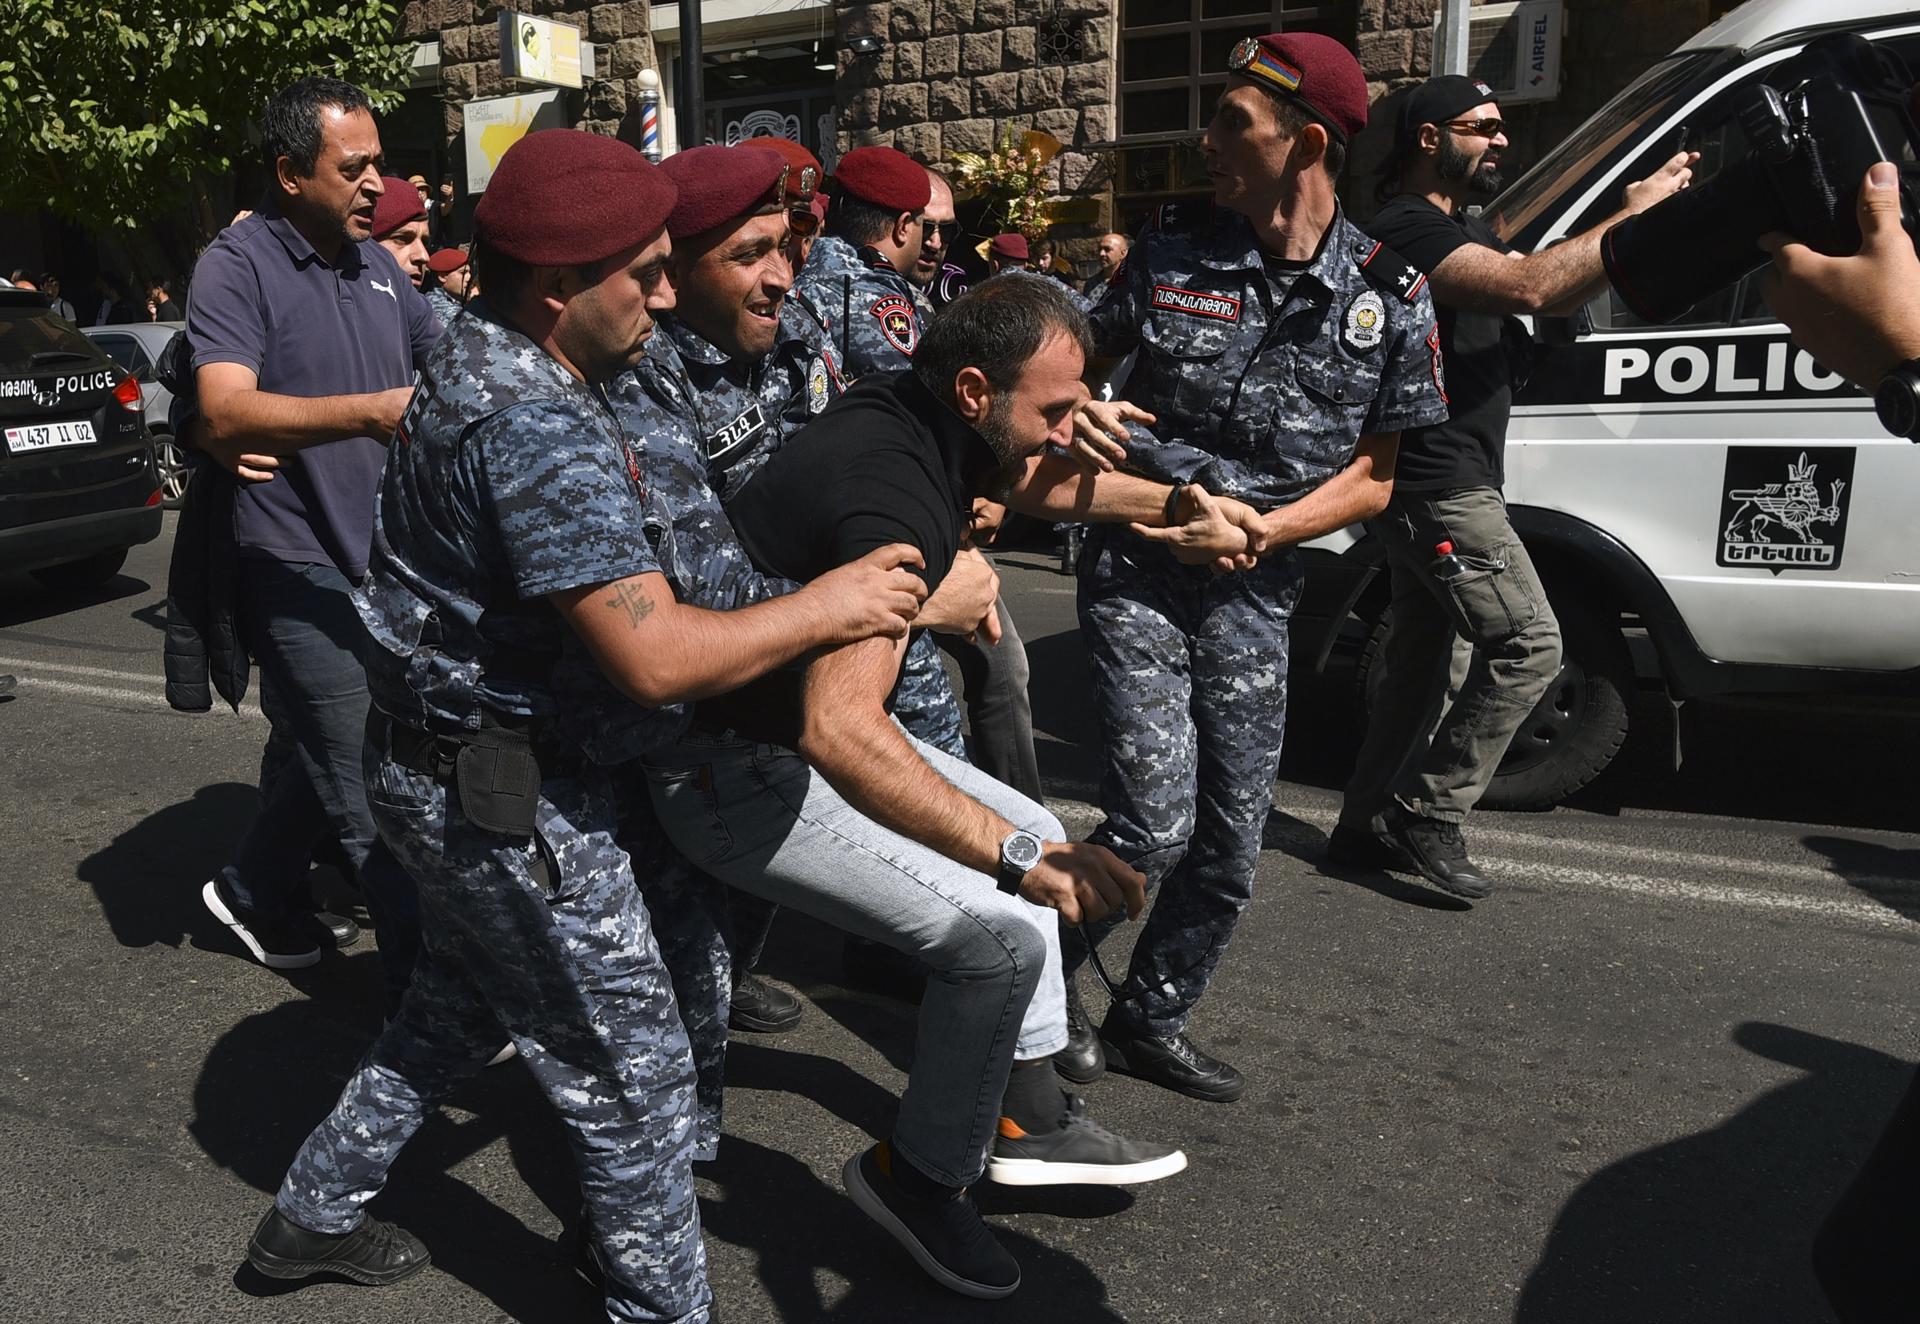 Yerevan (Armenia), 22/09/2023.- Armenian policemen detain a participant of the protest against Azerbaijan's military actions in the Nagorno-Karabakh region, in central Yerevan, Armenia, 22 September 2023. More than 80 people were detained at anti-government rallies in Yerevan, the Armenian Police reported. On 19 September, after the start of the military operation of the Azerbaijani Armed Forces in Nagorno-Karabakh, opposition protests began in Armenia demanding the resignation of Prime Minister Nikol Pashinyan. A national committee has been created that coordinates actions to remove Pashinyan and his government from power. Representative of the Dashnaktsutyun party Ishkhan Saghatelyan said that the parliamentary opposition is also initiating the process of impeachment of Pashinyan. (Protestas, Azerbaiyán) EFE/EPA/NAREK ALEKSANYAN